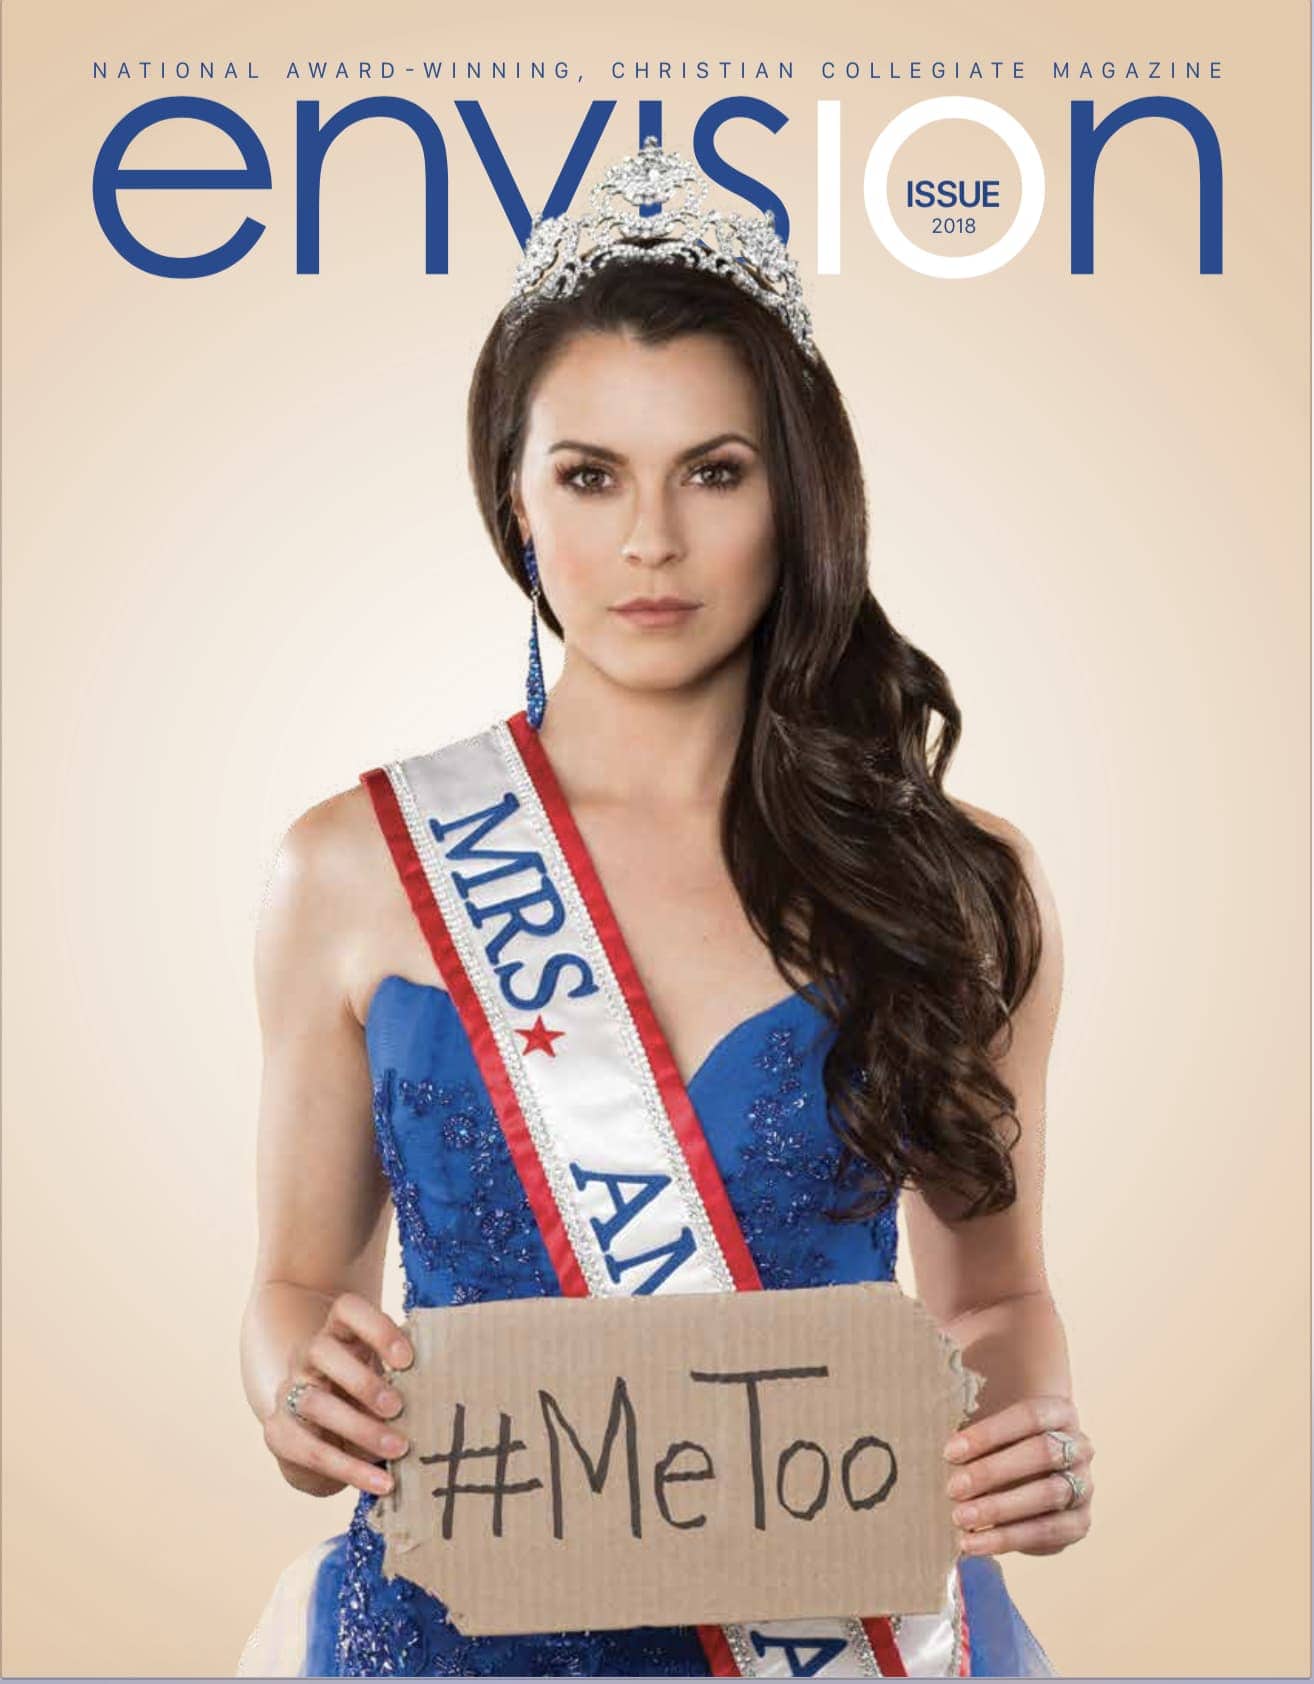 Envision magazine, a student-produced publication at Andrews University, received the Associated Collegiate Press (ACP) Pacemaker award for its 10th issue, which features Mekayla Eppers, Mrs. America 2018, on the cover. [Photo: Envision magazine]